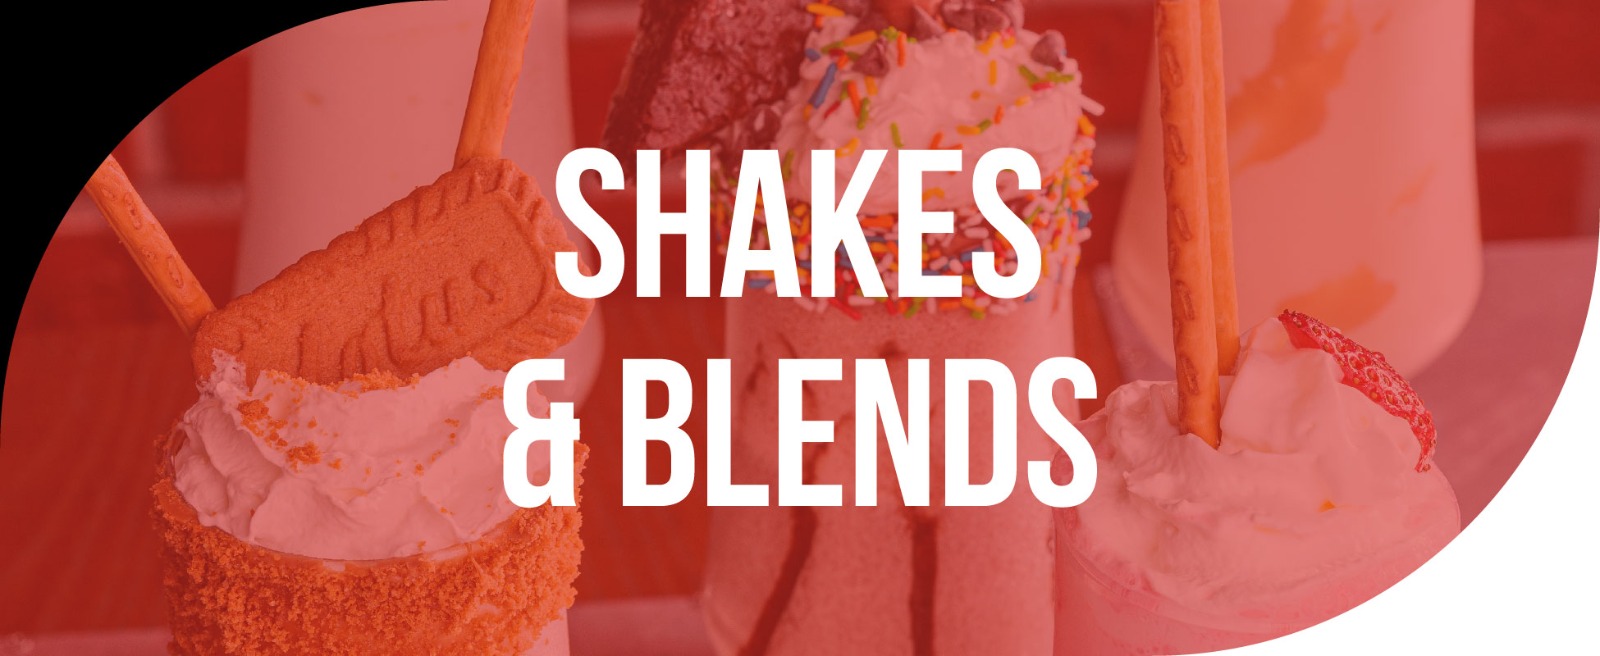 Shakes & Blends